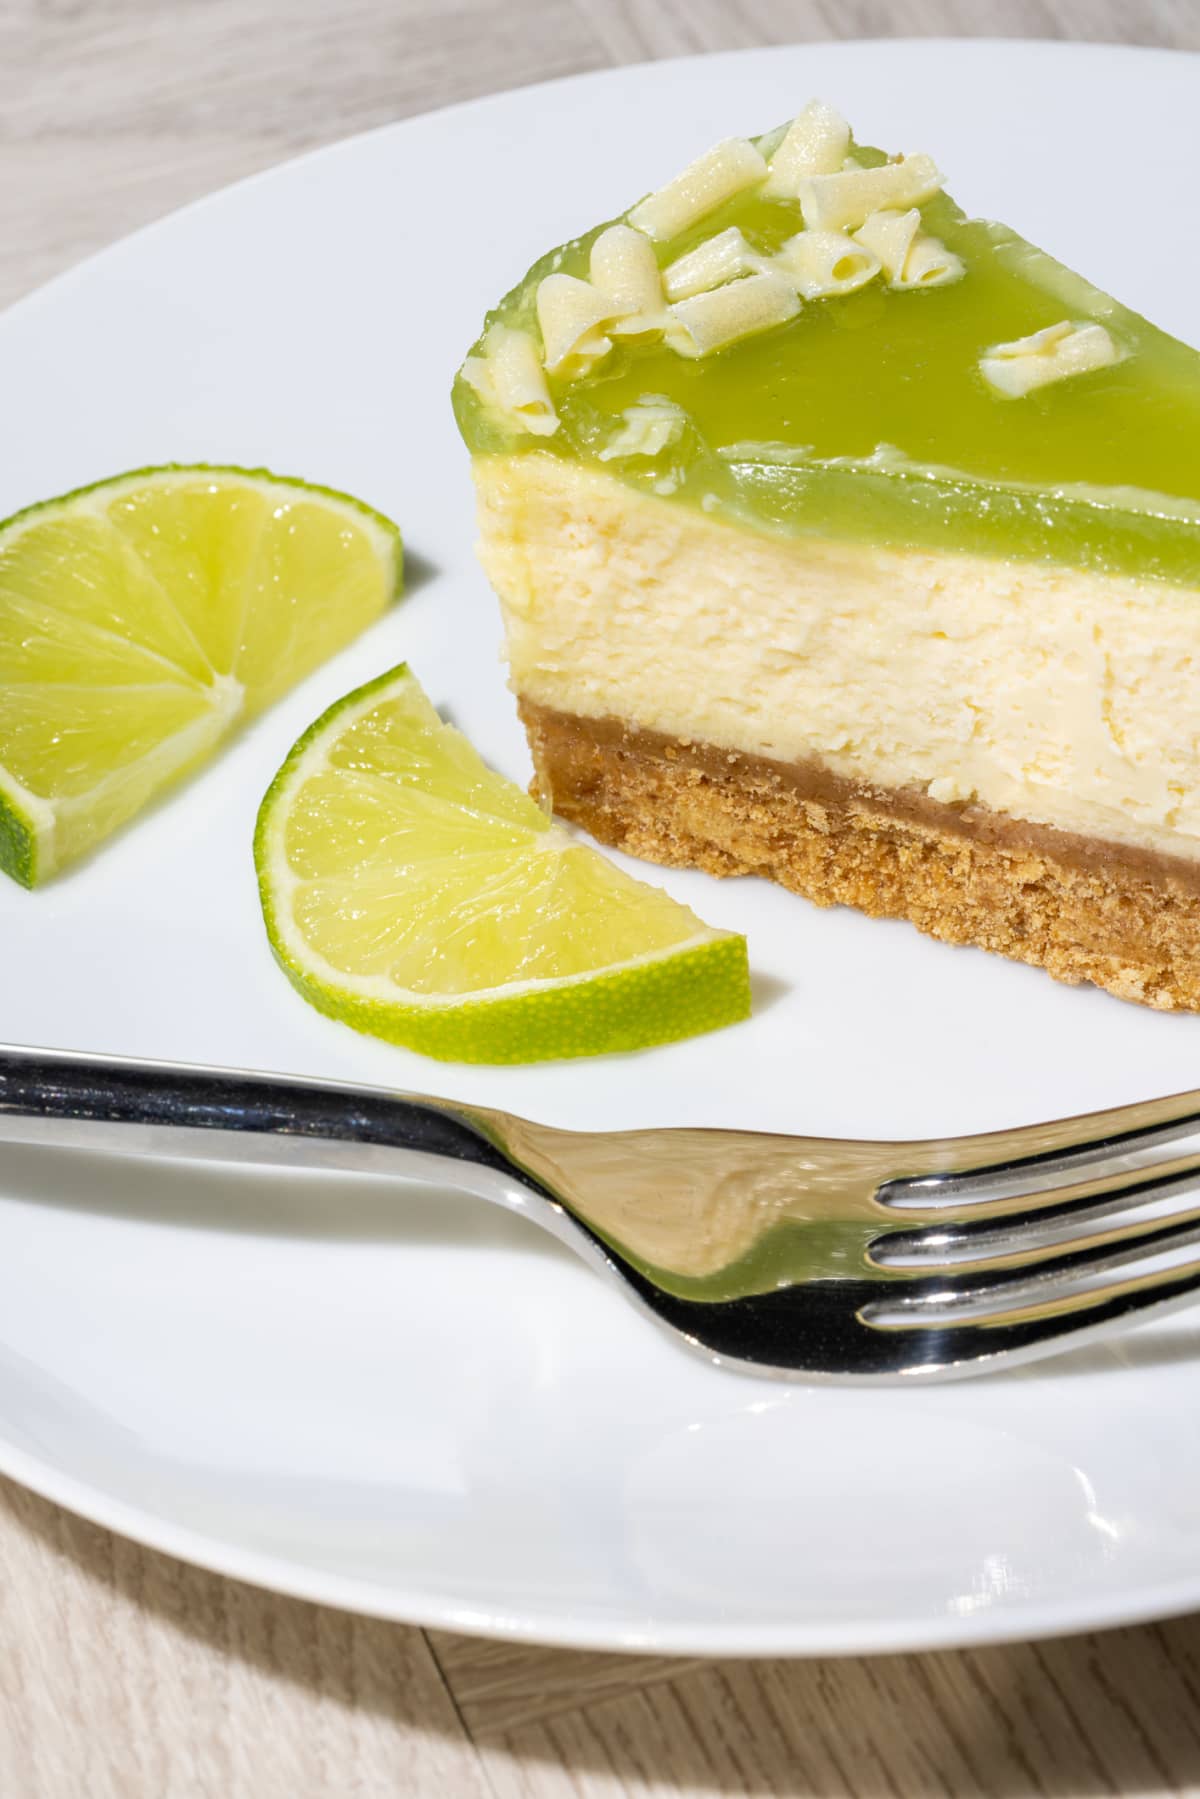 Lime cheesecake slice. Close-up of a delicious sweet citrus dessert. One serving of a baked key lime cheesecake with digestive biscuit base served on a white plate with fork and green lime slices